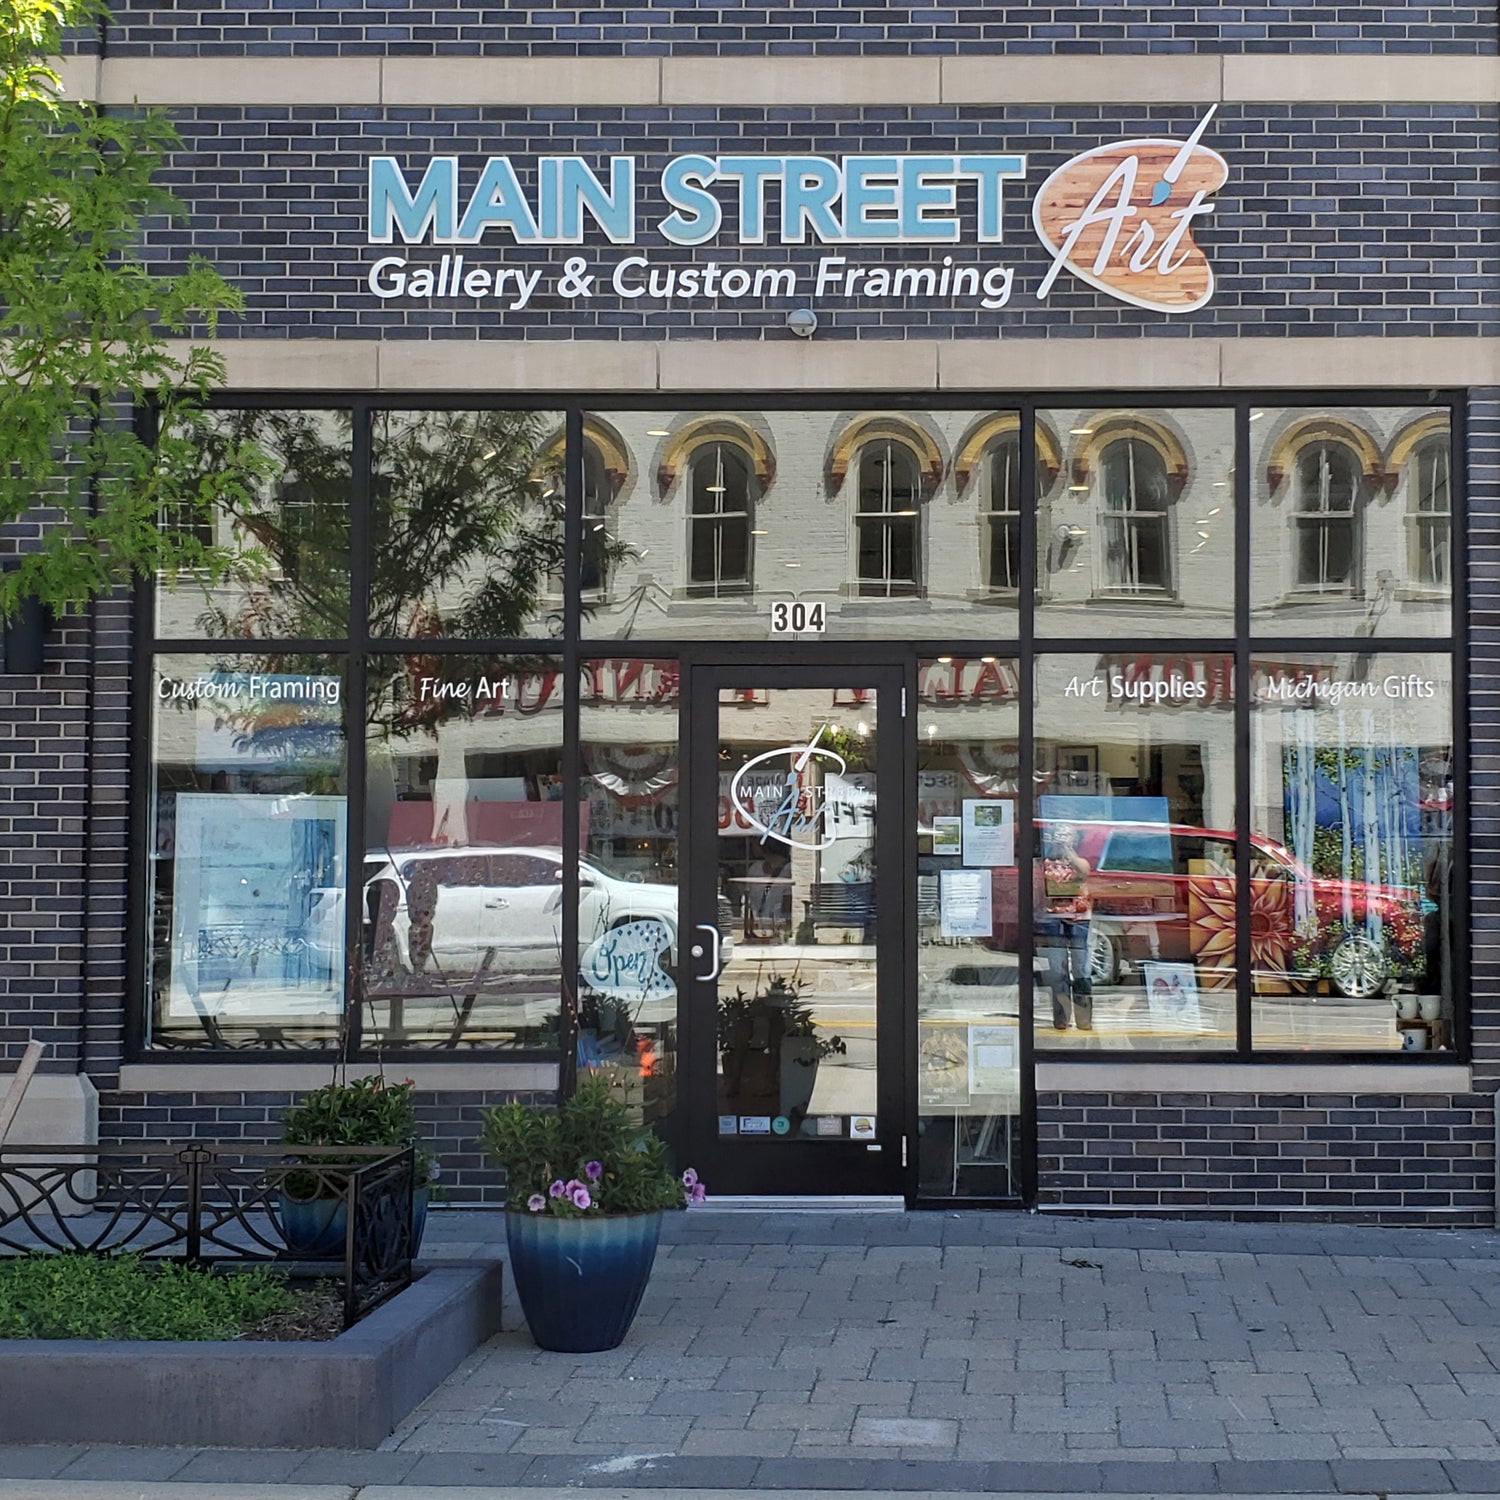 Main Street Art storefront located in Milford, MI.